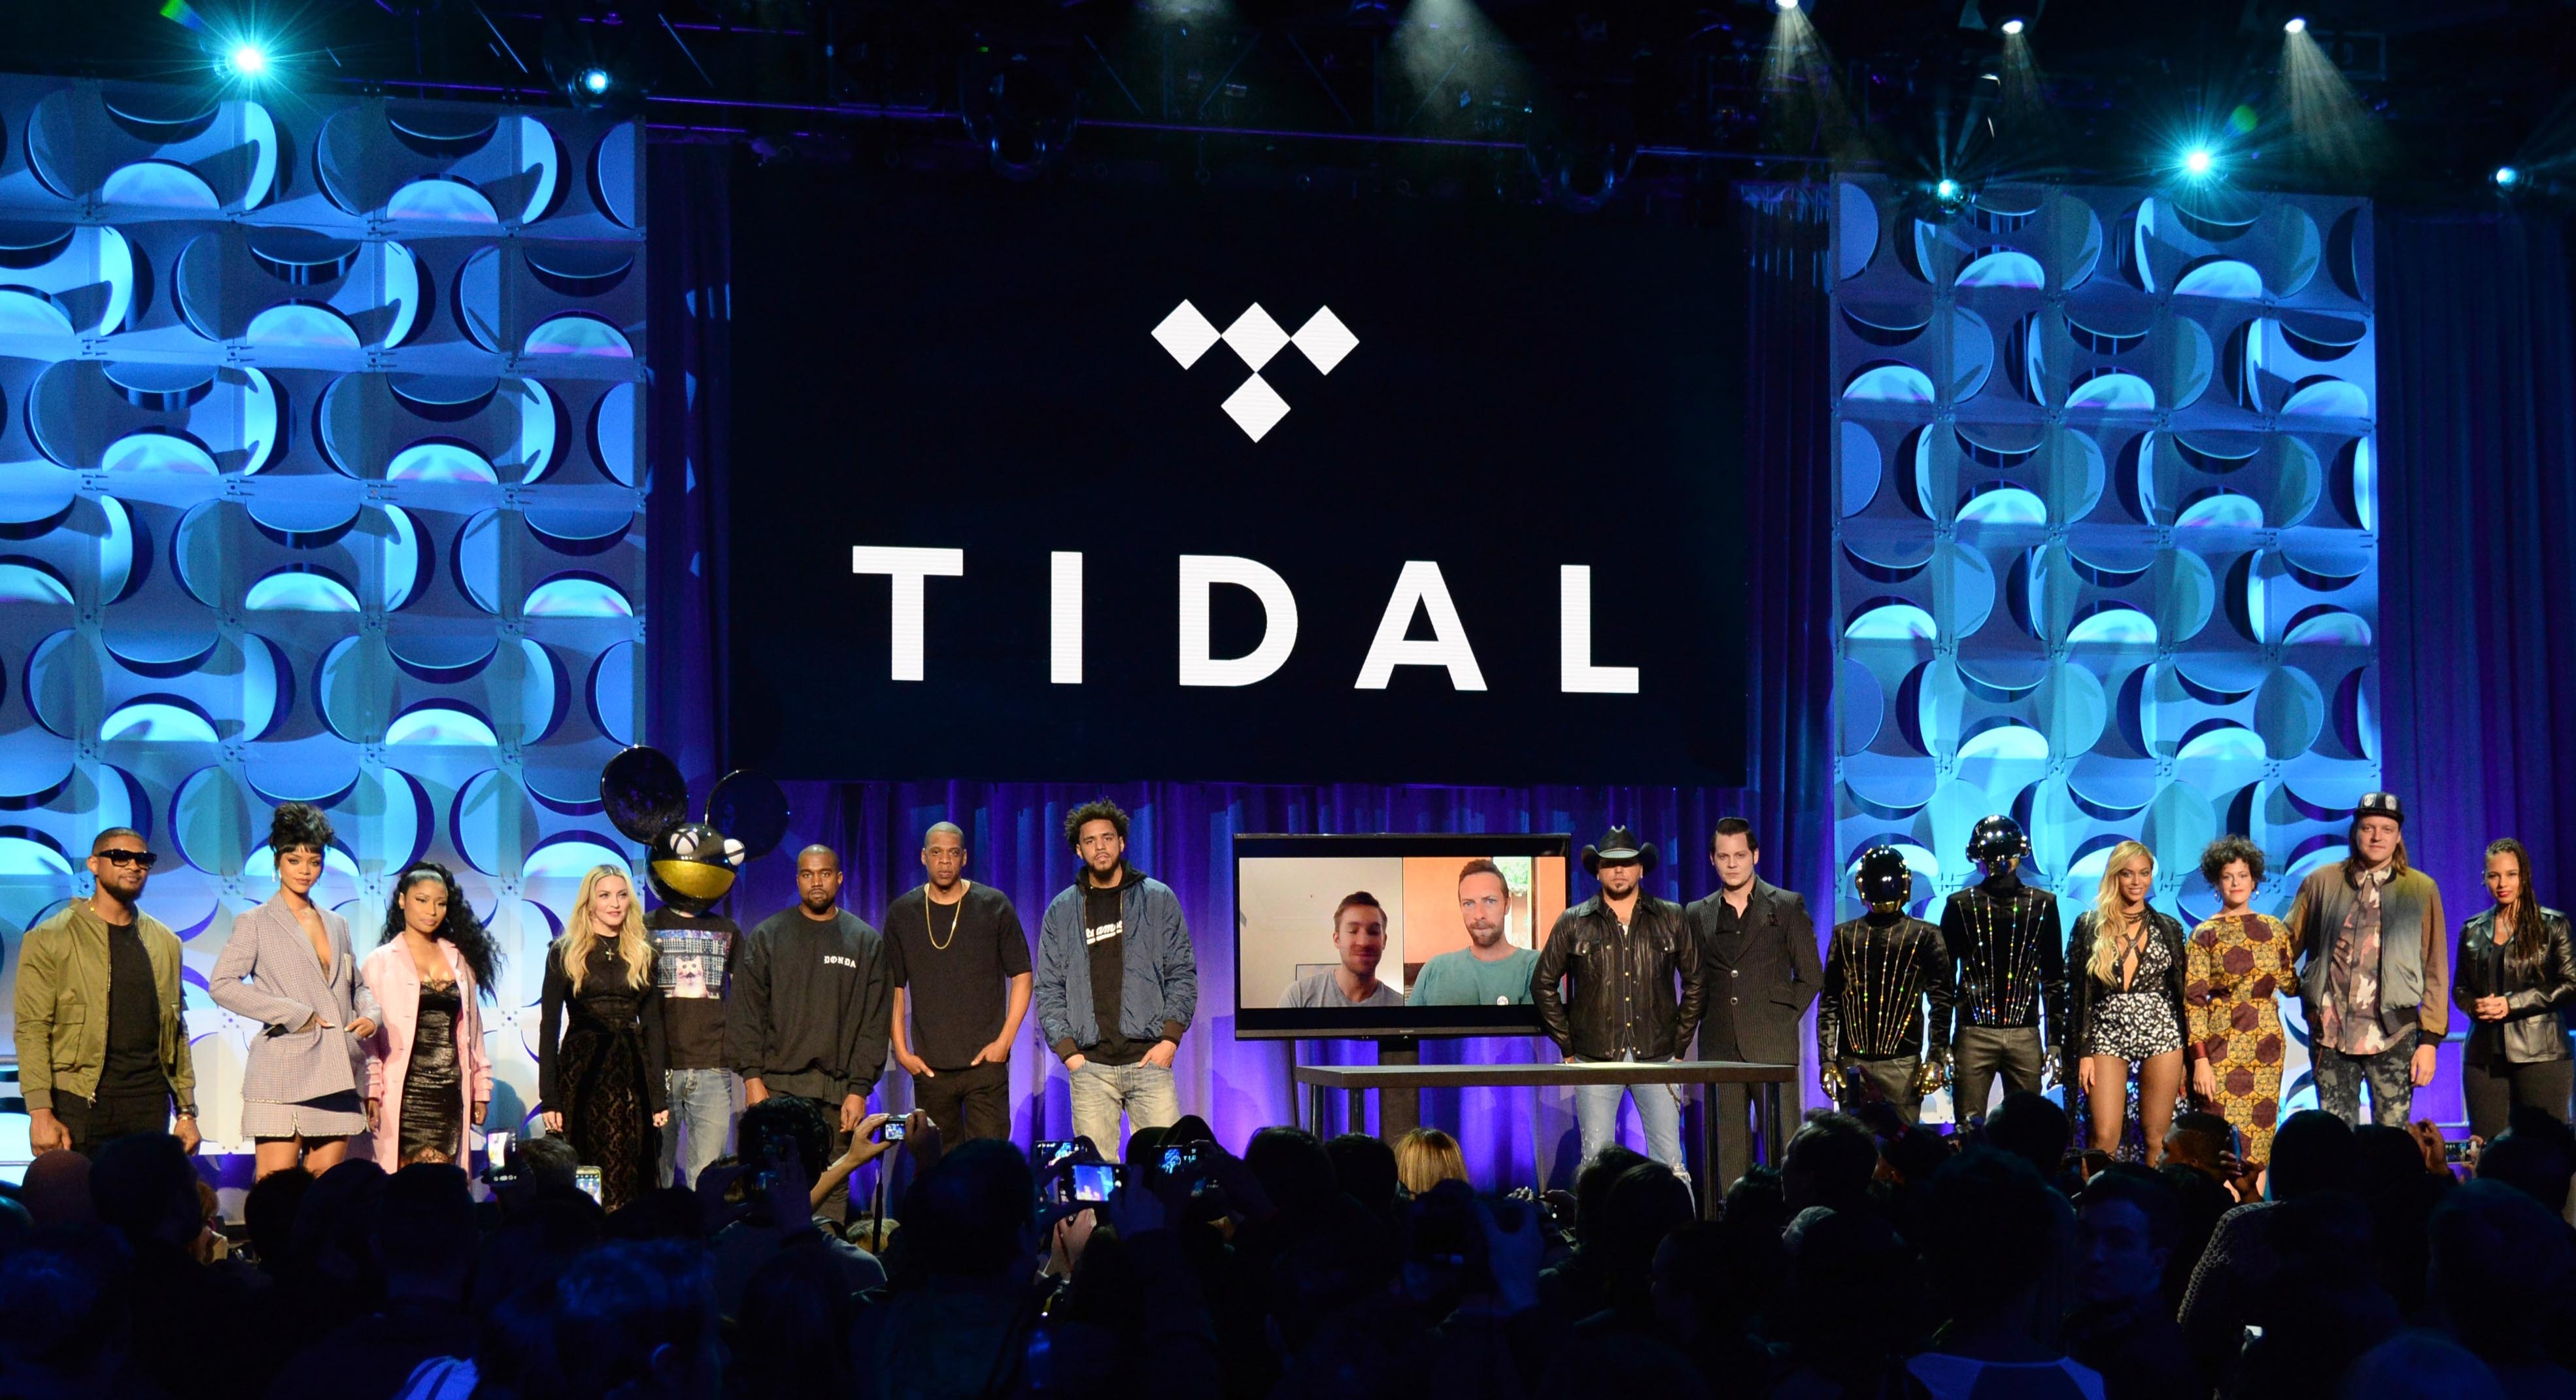 NEW YORK, NY - MARCH 30: Usher, Rihanna, Nicki Minaj, Madonna, Dead Mouse, Kanye West, Jay Z, Jason Aldean, Jack White, Daft Punk, Beyonce and Win Butler attend the Tidal launch event #TIDALforALL at Skylight at Moynihan Station on March 30, 2015 in New York City. (Photo by Kevin Mazur/Getty Images For Roc Nation)